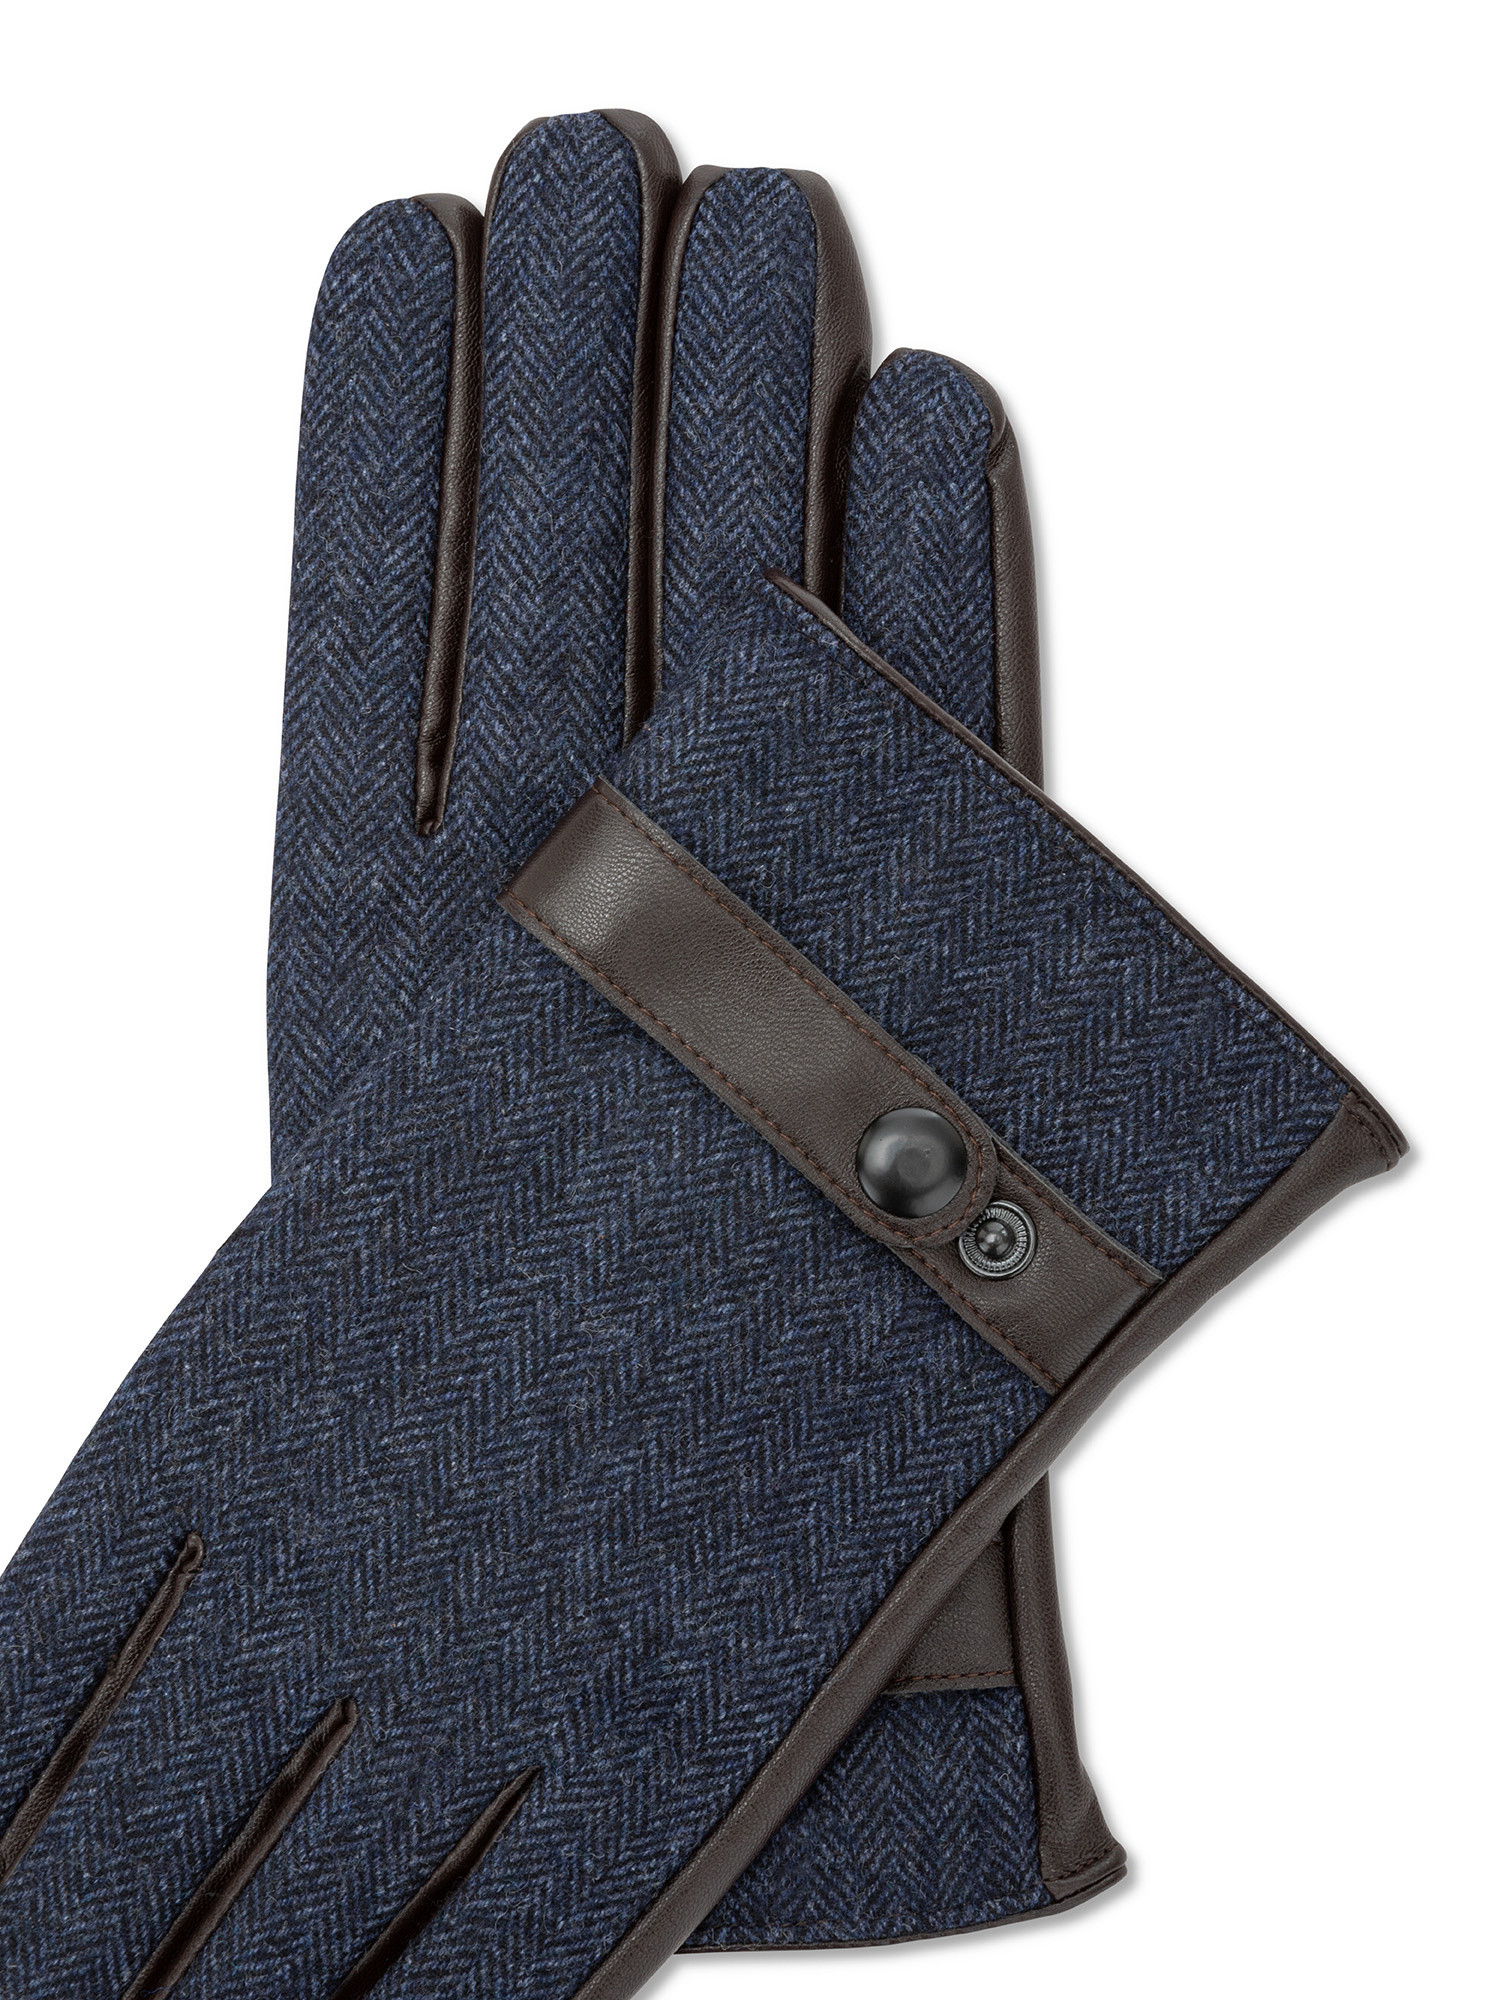 Luca D'Altieri - Gloves with strap, Blue, large image number 1